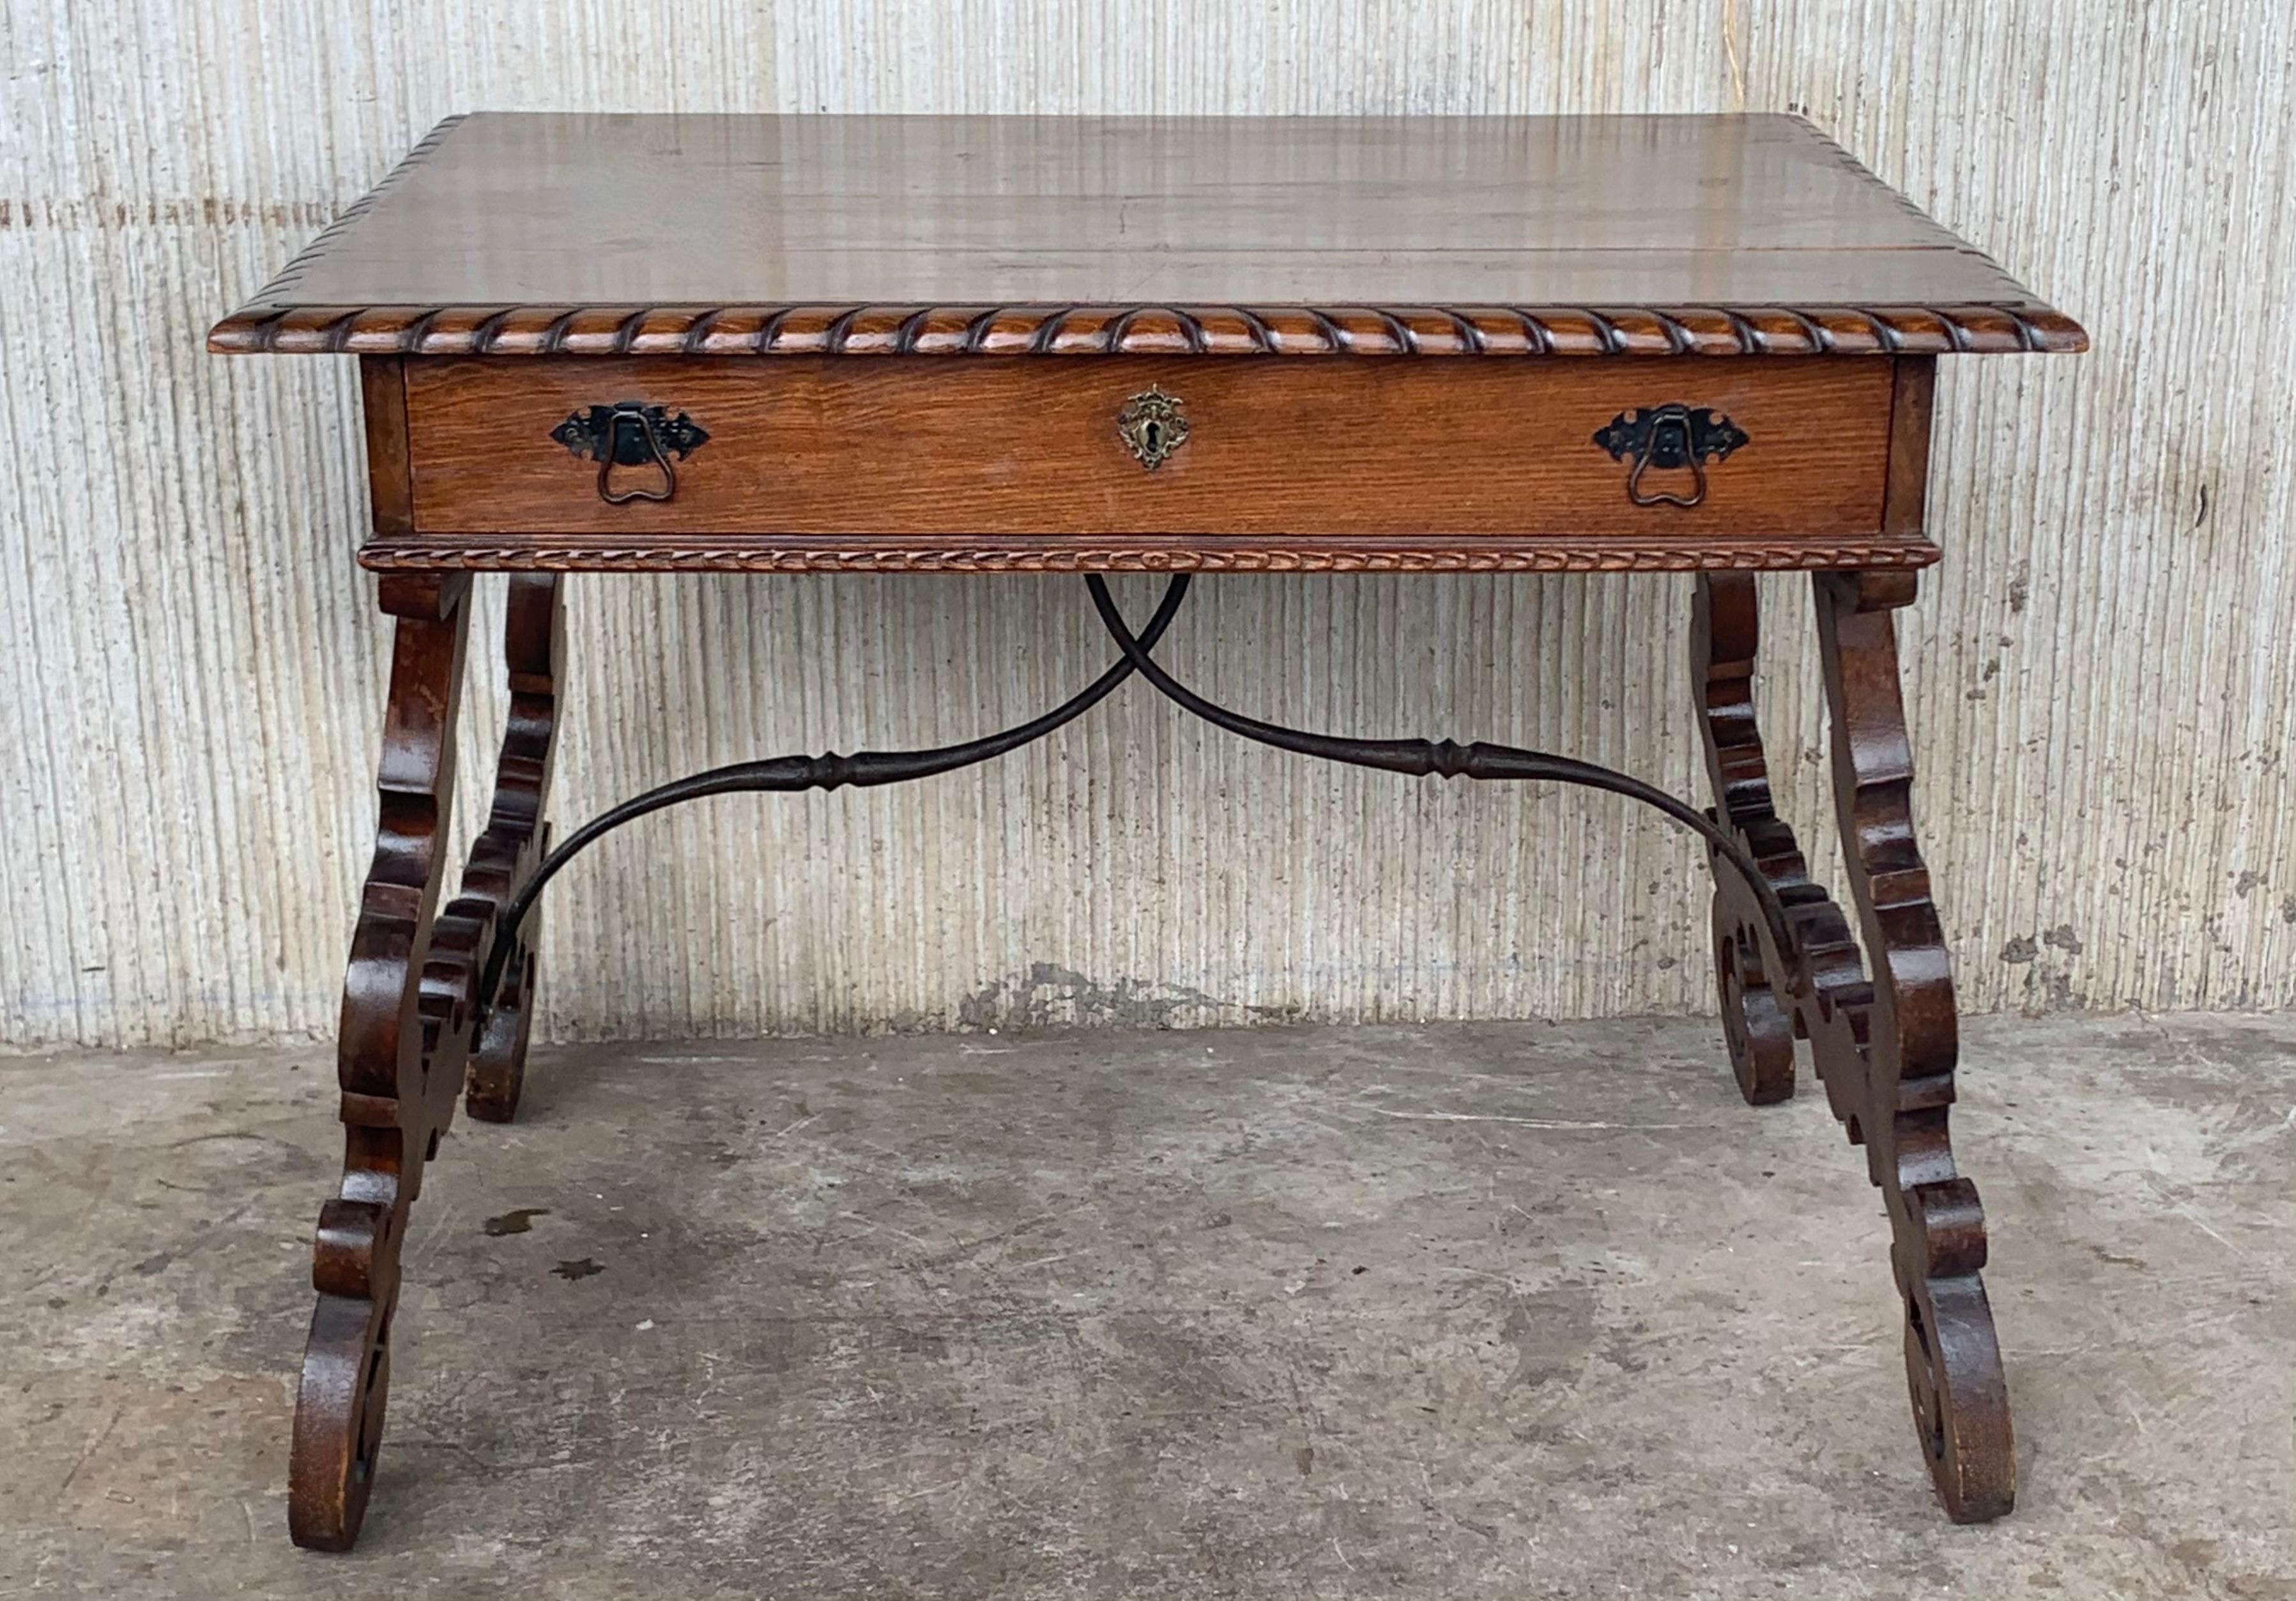 Early 20th Spanish desk with lyre legs and carved edges on top
An 20th century Spanish Baroque style desk, or writing table made of solid walnut with lyre shaped legs joined by wrought iron stretchers. Hand carved decoration across the front and